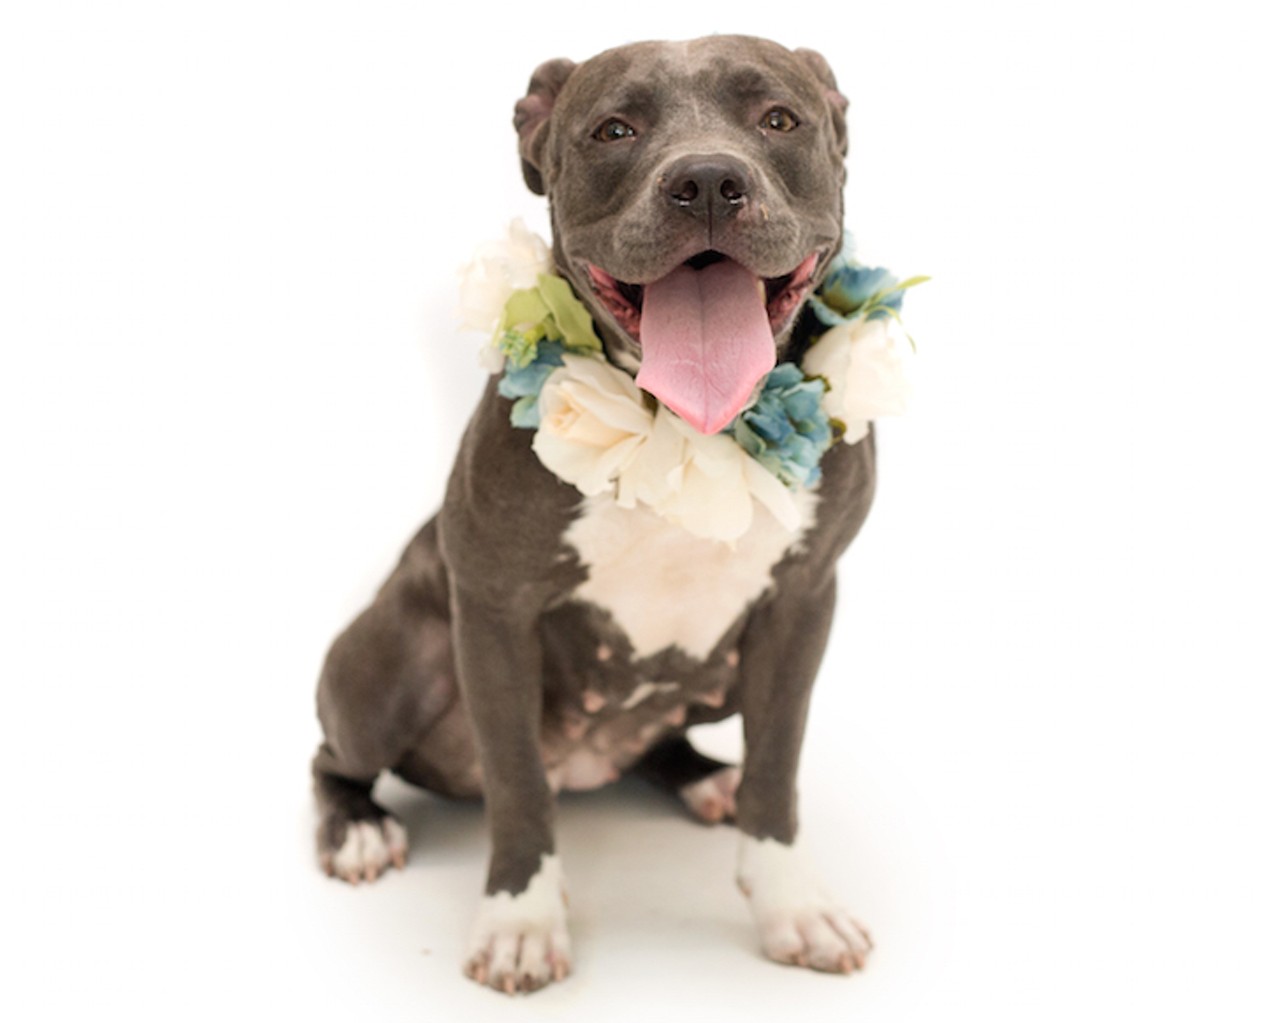 24 adoptable pooches looking for a new home right now